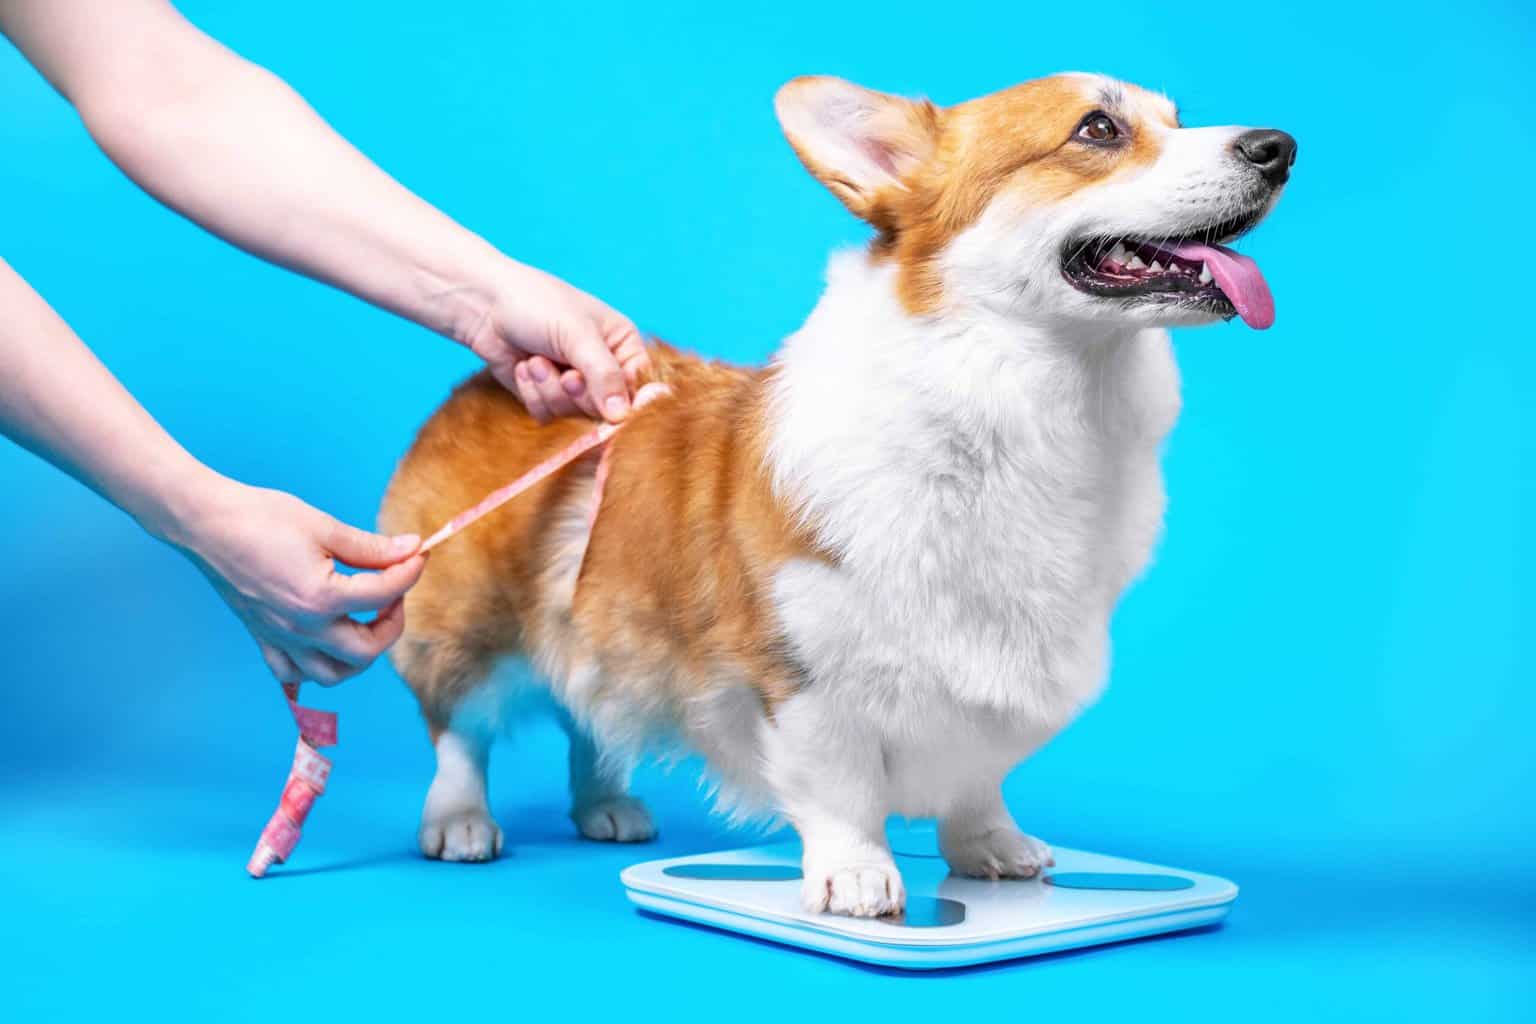 Owner measures overweight corgi. Tips to help your dog lose weight: exercise, help your dog drink more water, use a feeding chart, consult your vet, and cut back on treats.